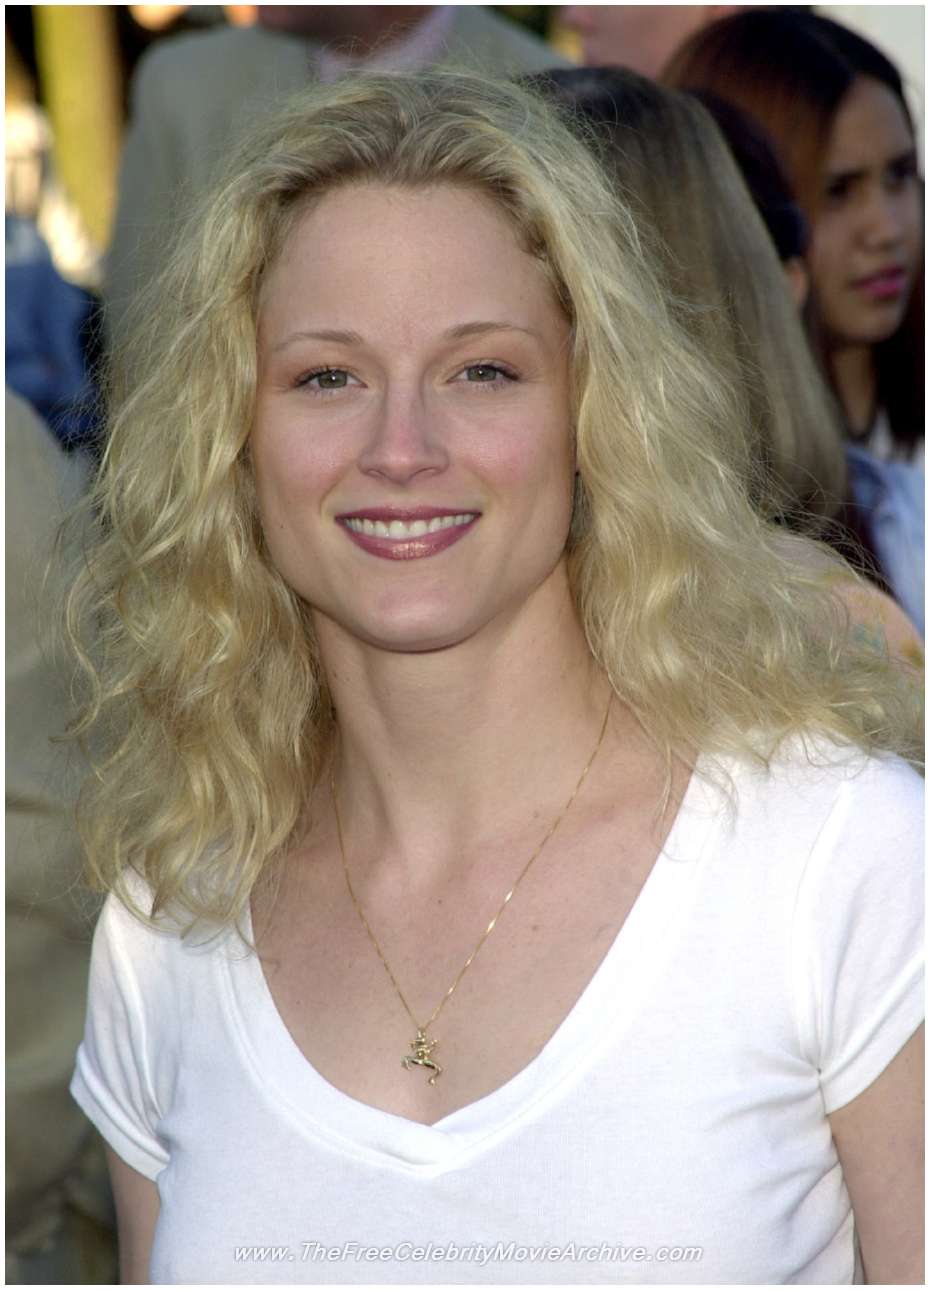 To The Teri Polo Wallpaper Just Right Click On Image And